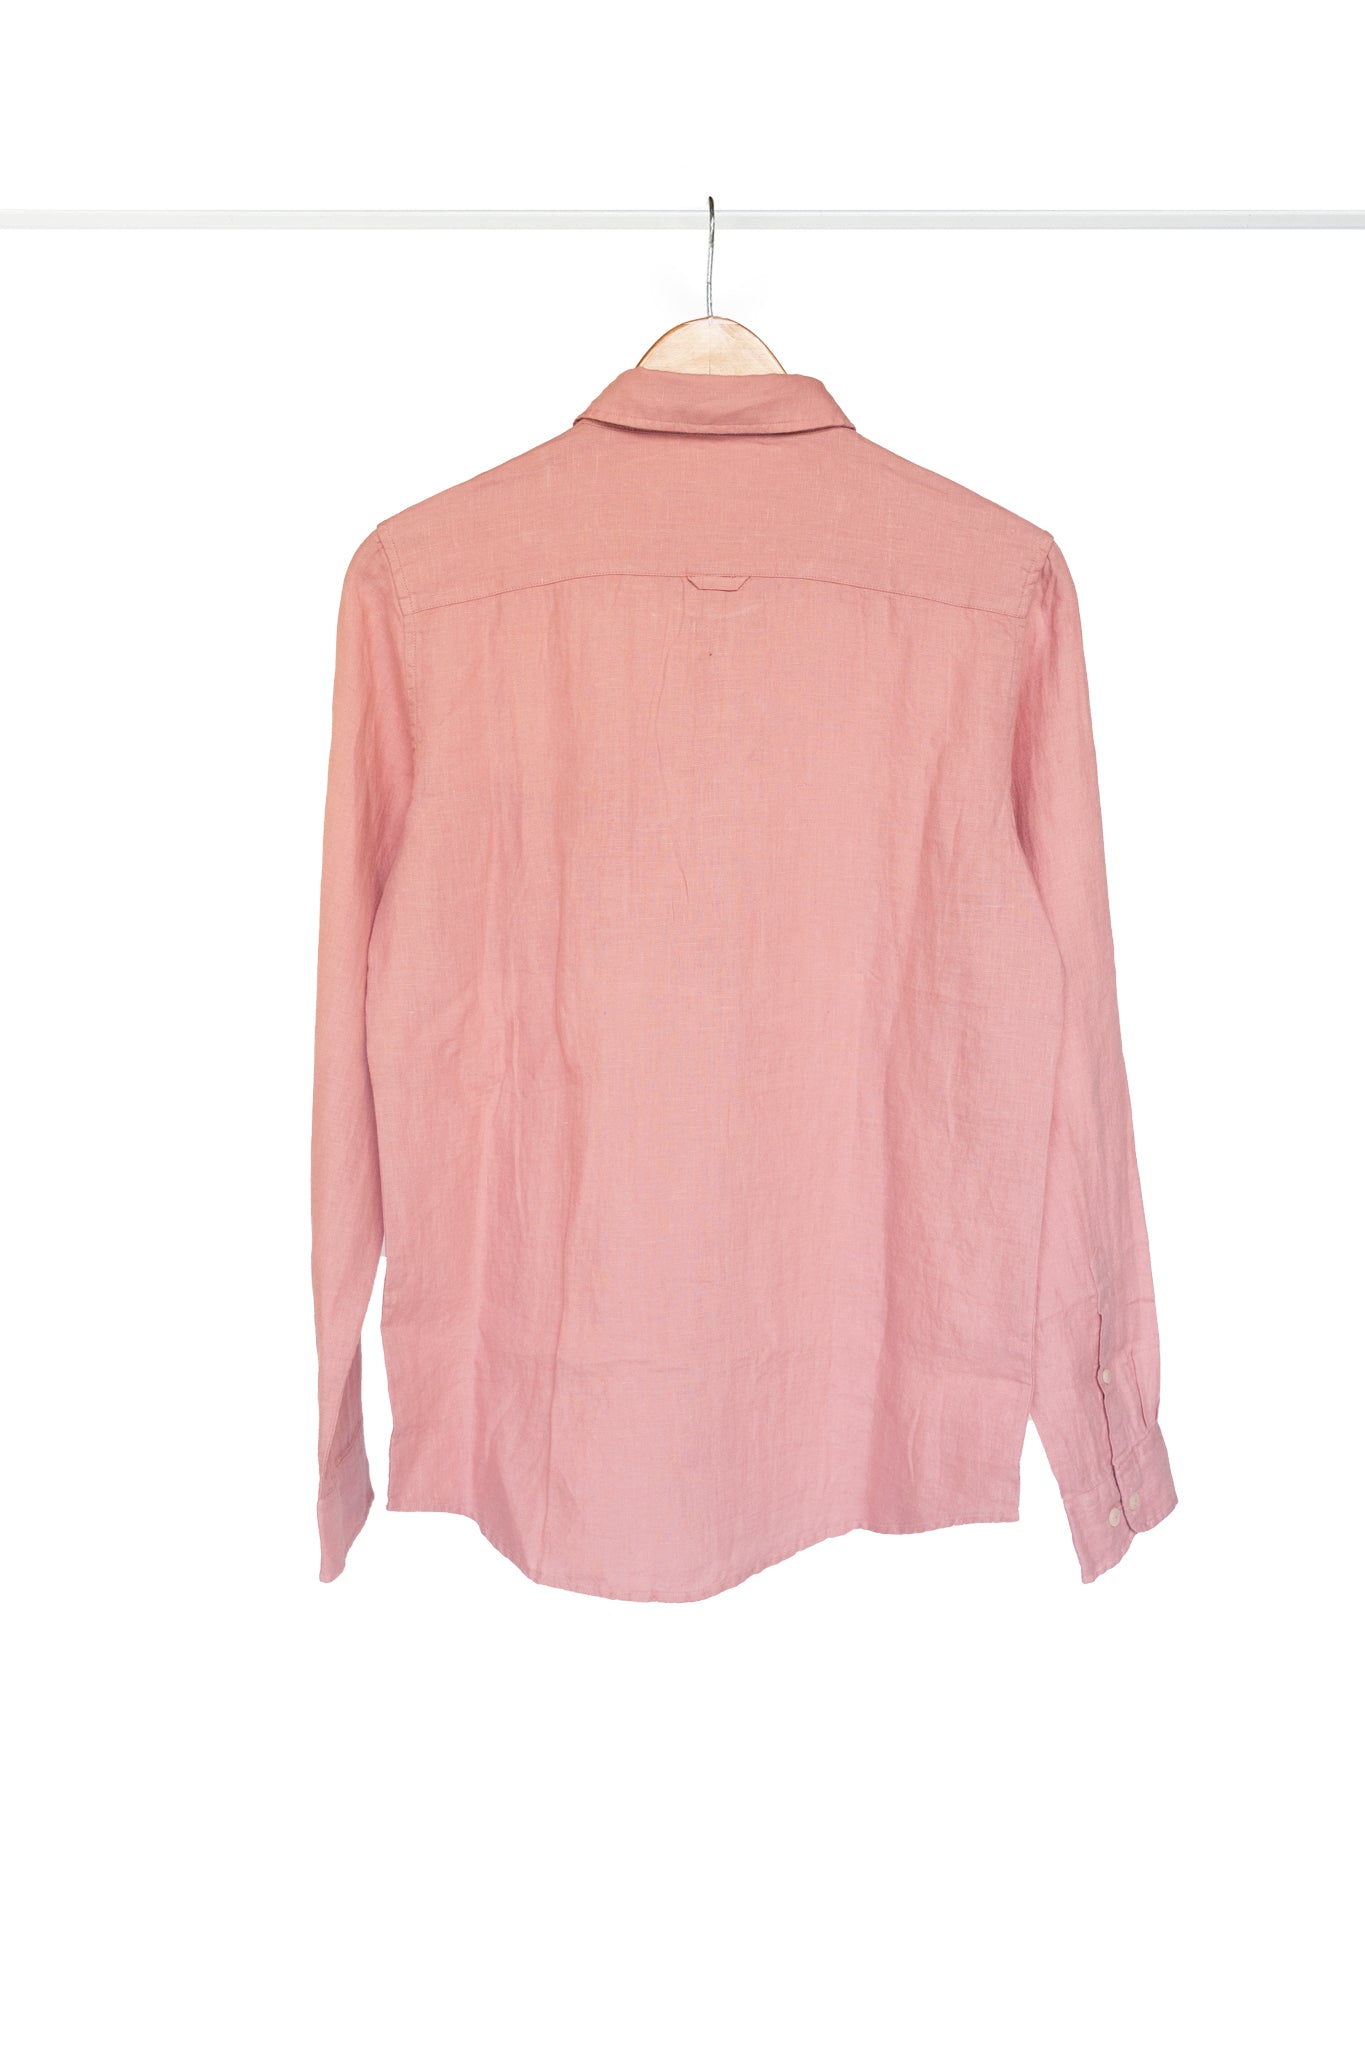 Bare Brown Pure Linen Shirt, Slim Fit with Full Sleeves - Pink